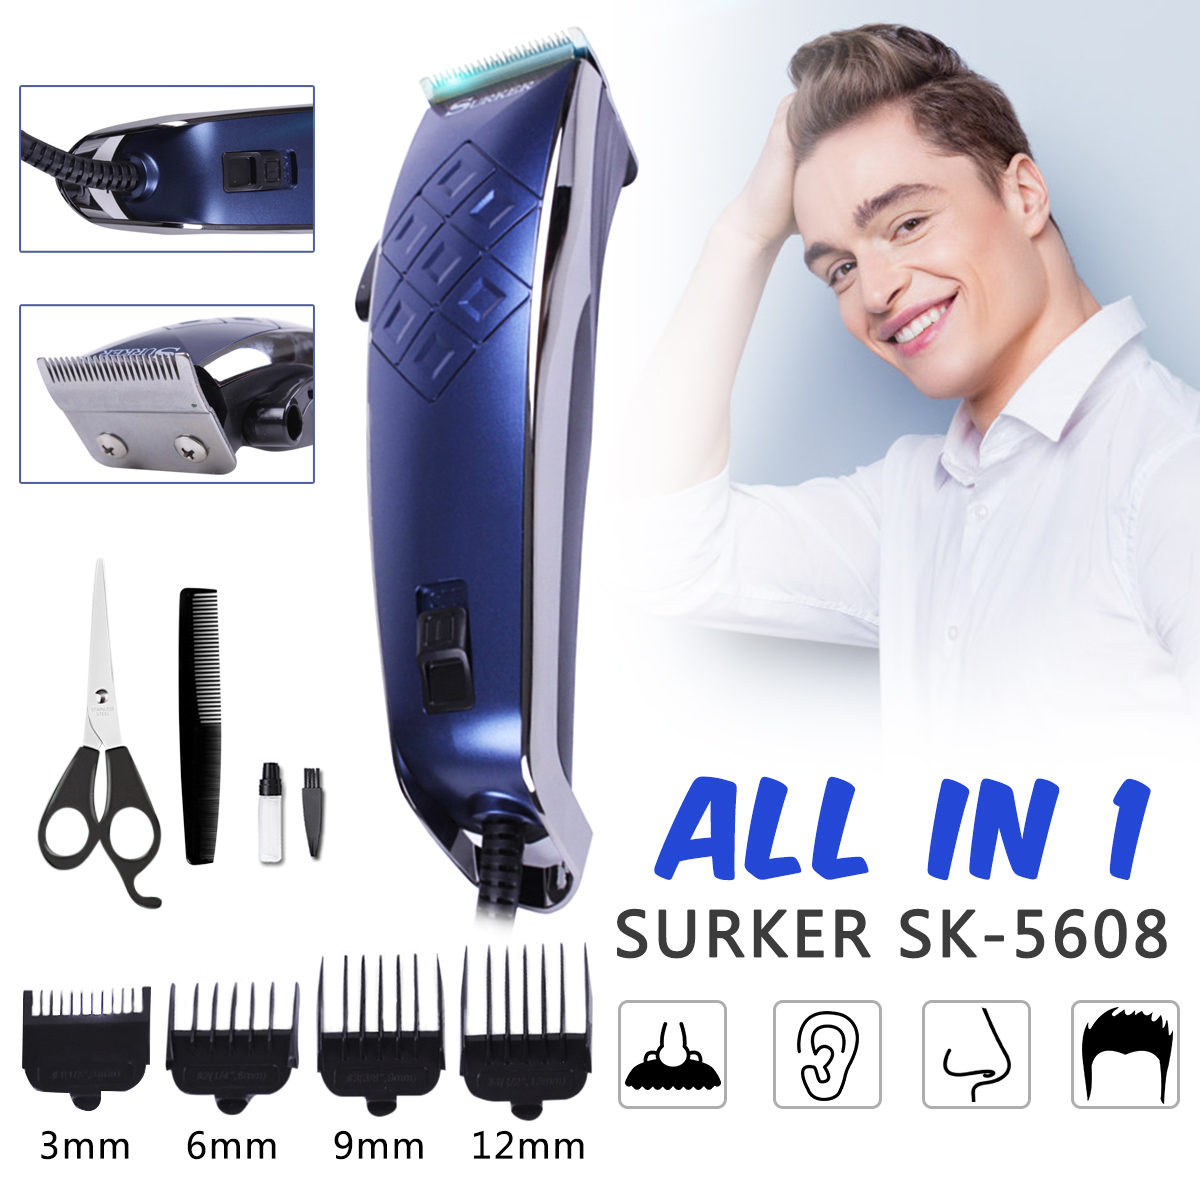 

SURKER SK-5608 Adjustable Rechargeable Hair Clipper Electric